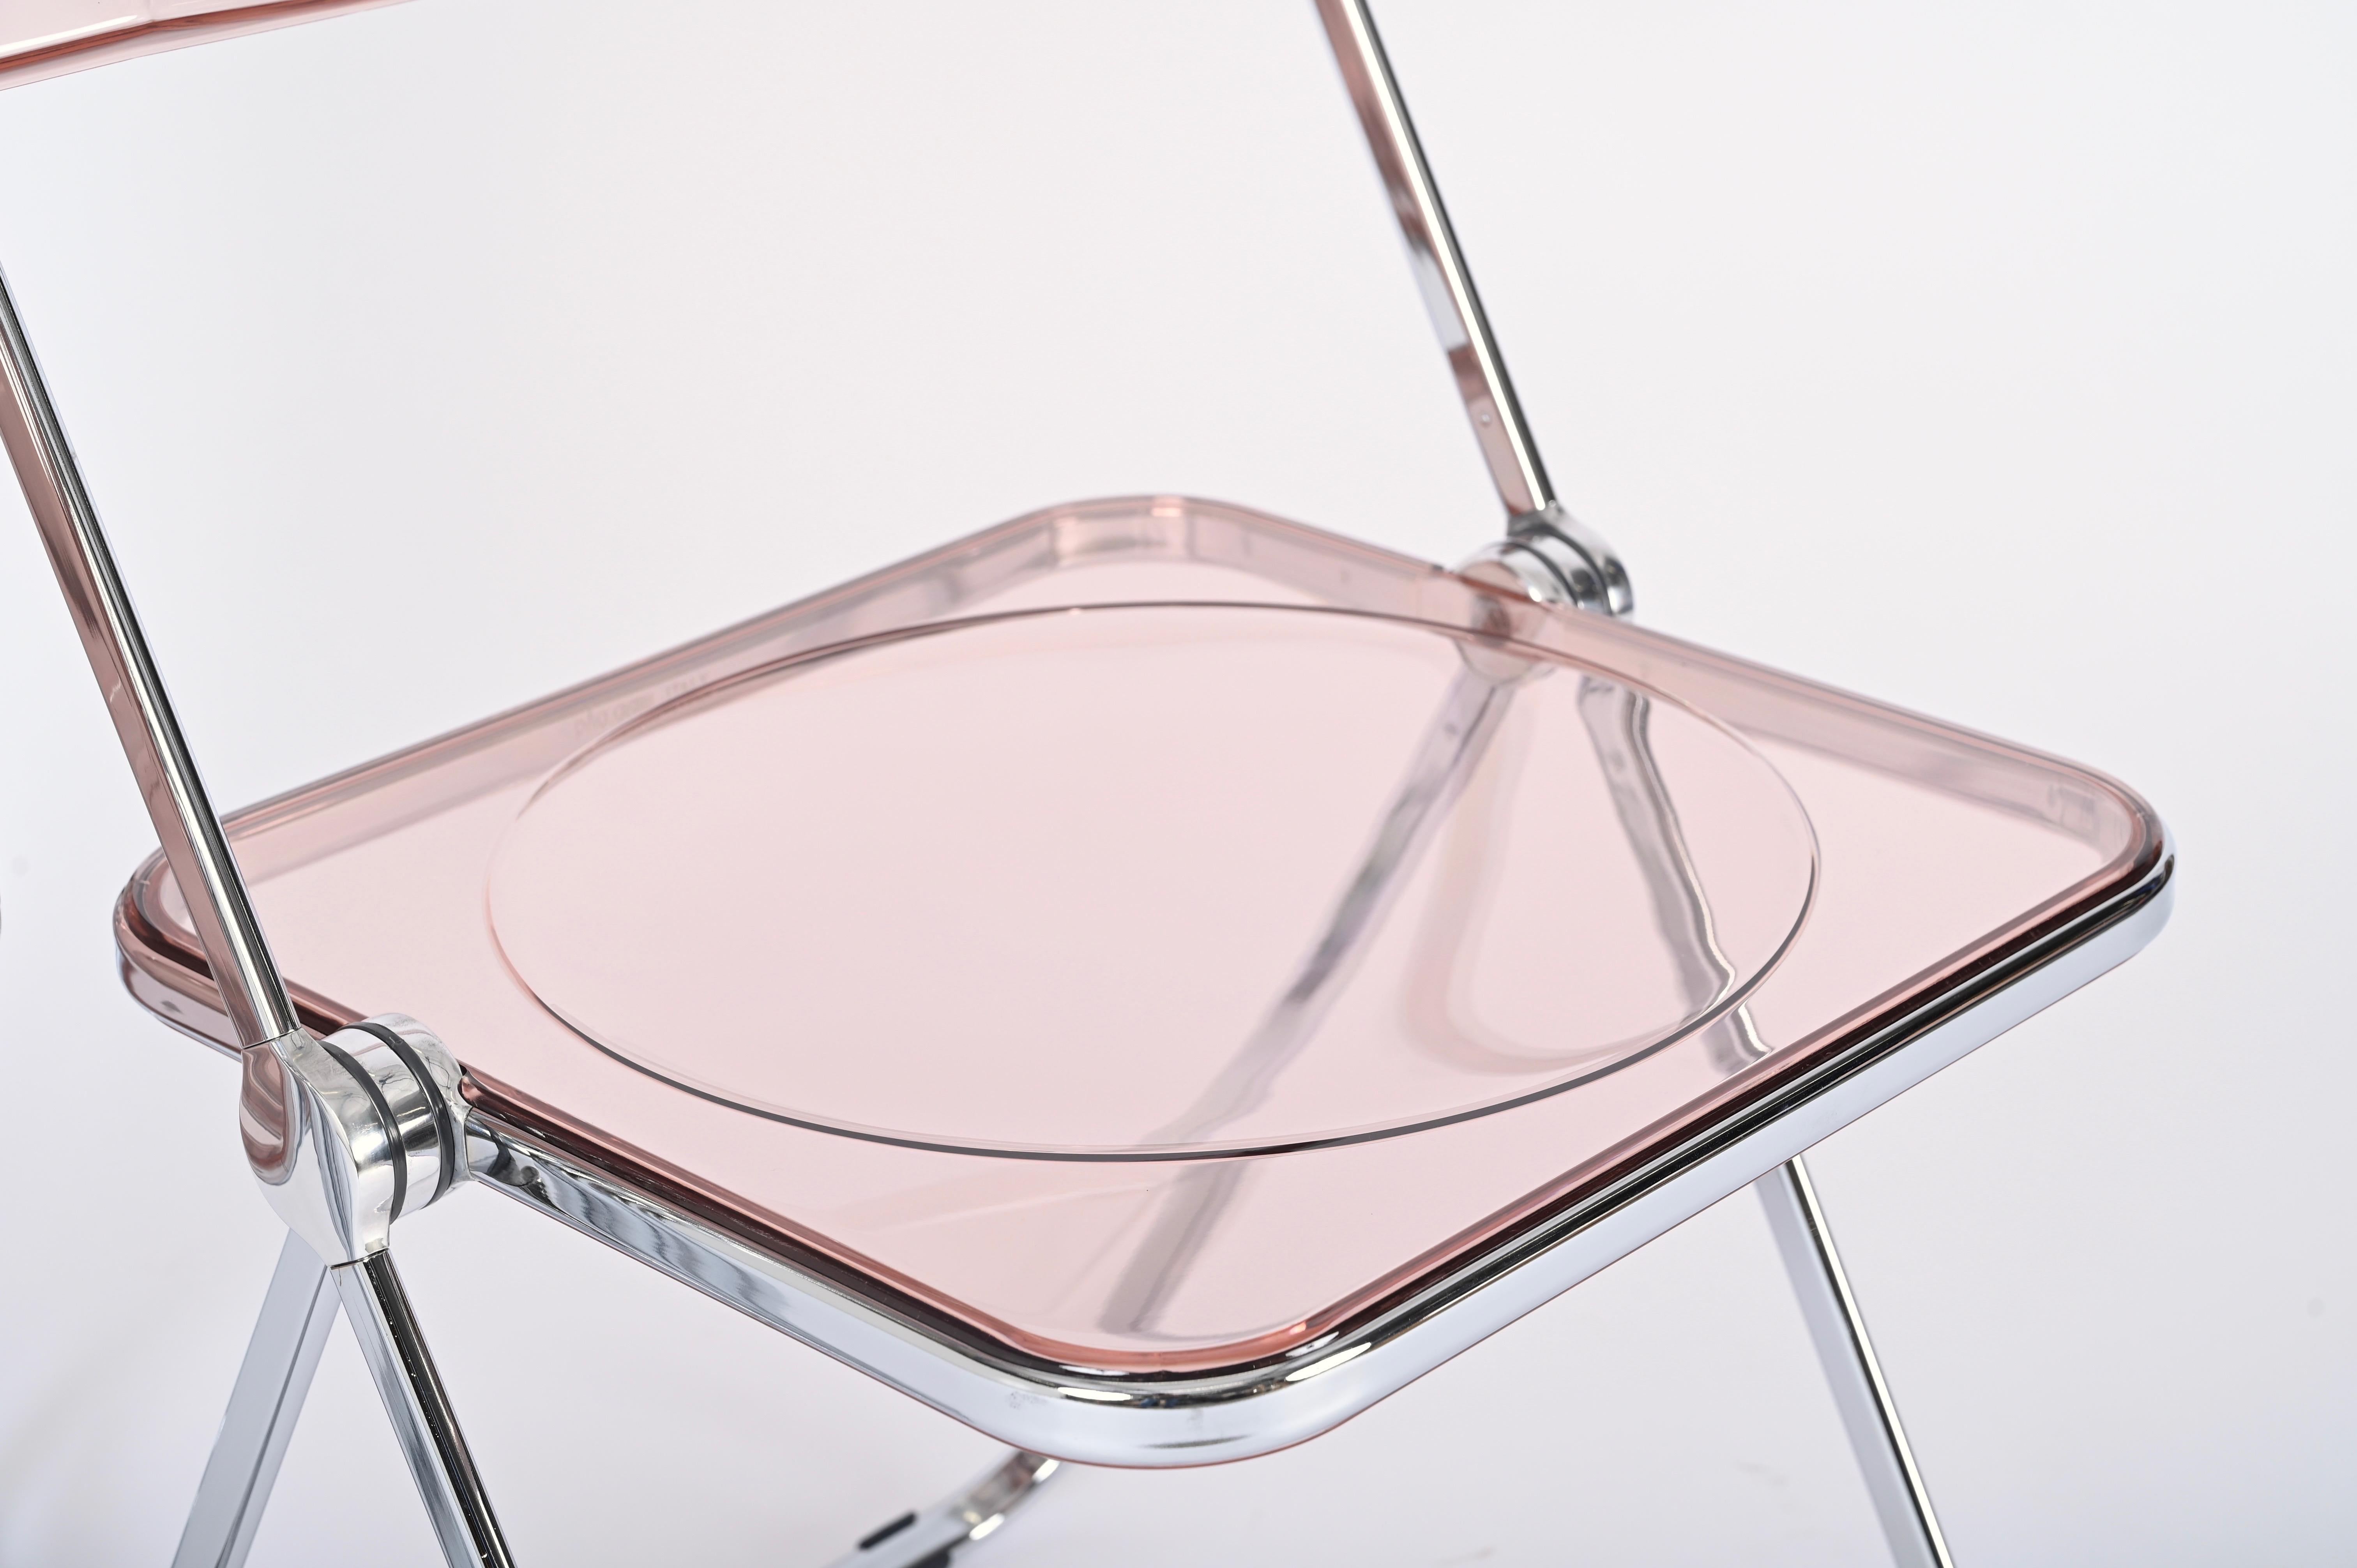 Set of 4 Lucite Pink and Chrome Plia Chairs, Piretti for Castelli, Italy 1970s In Excellent Condition For Sale In Roma, IT